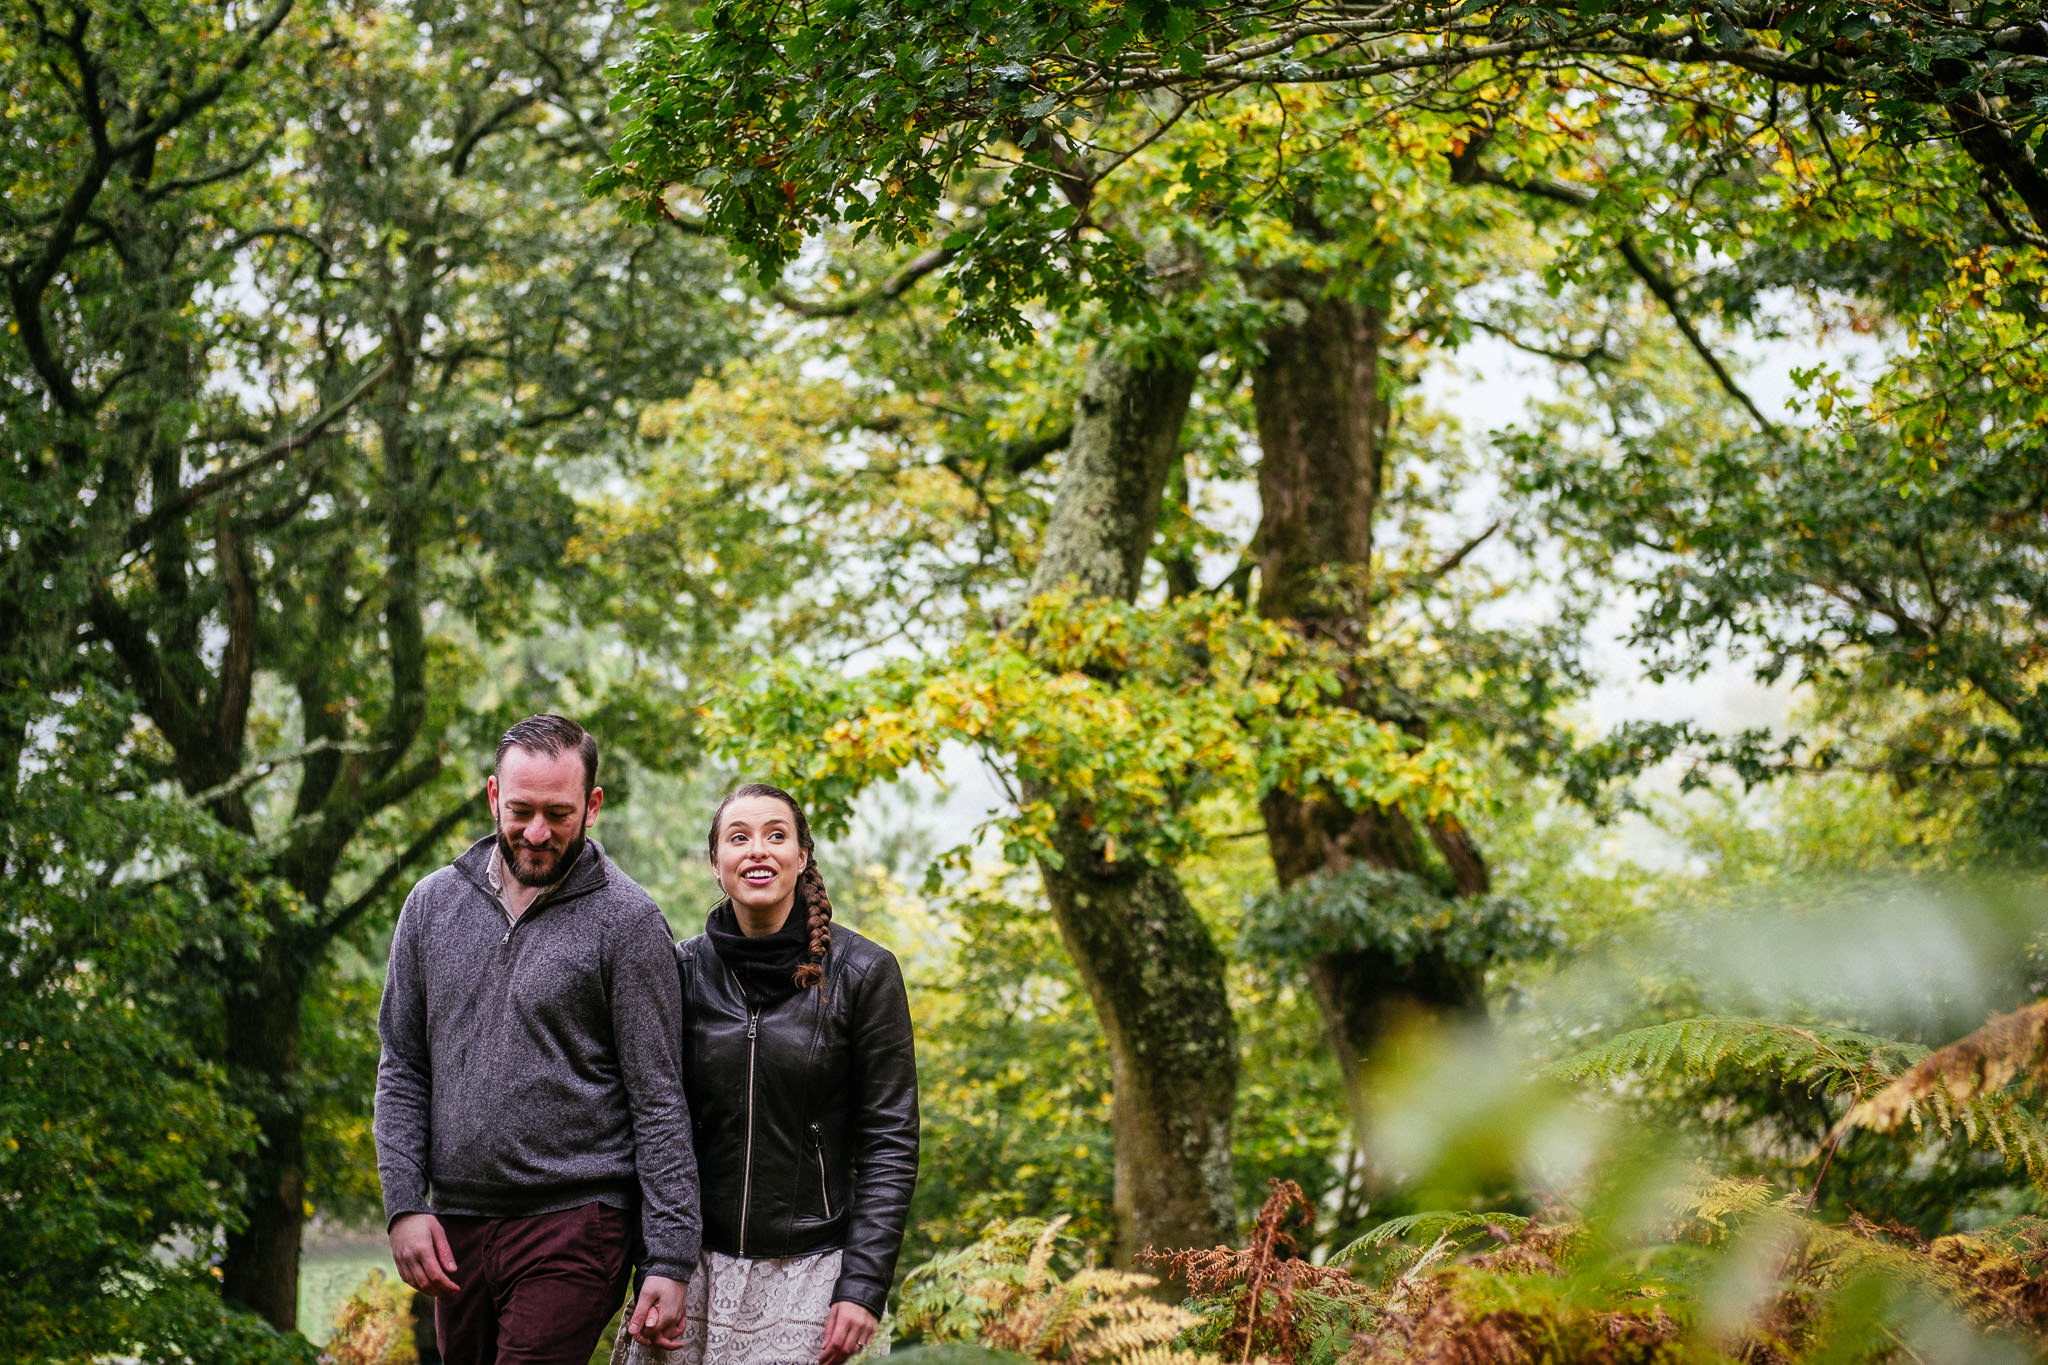 engaged couple walking through a forrest in the rain in Ireland